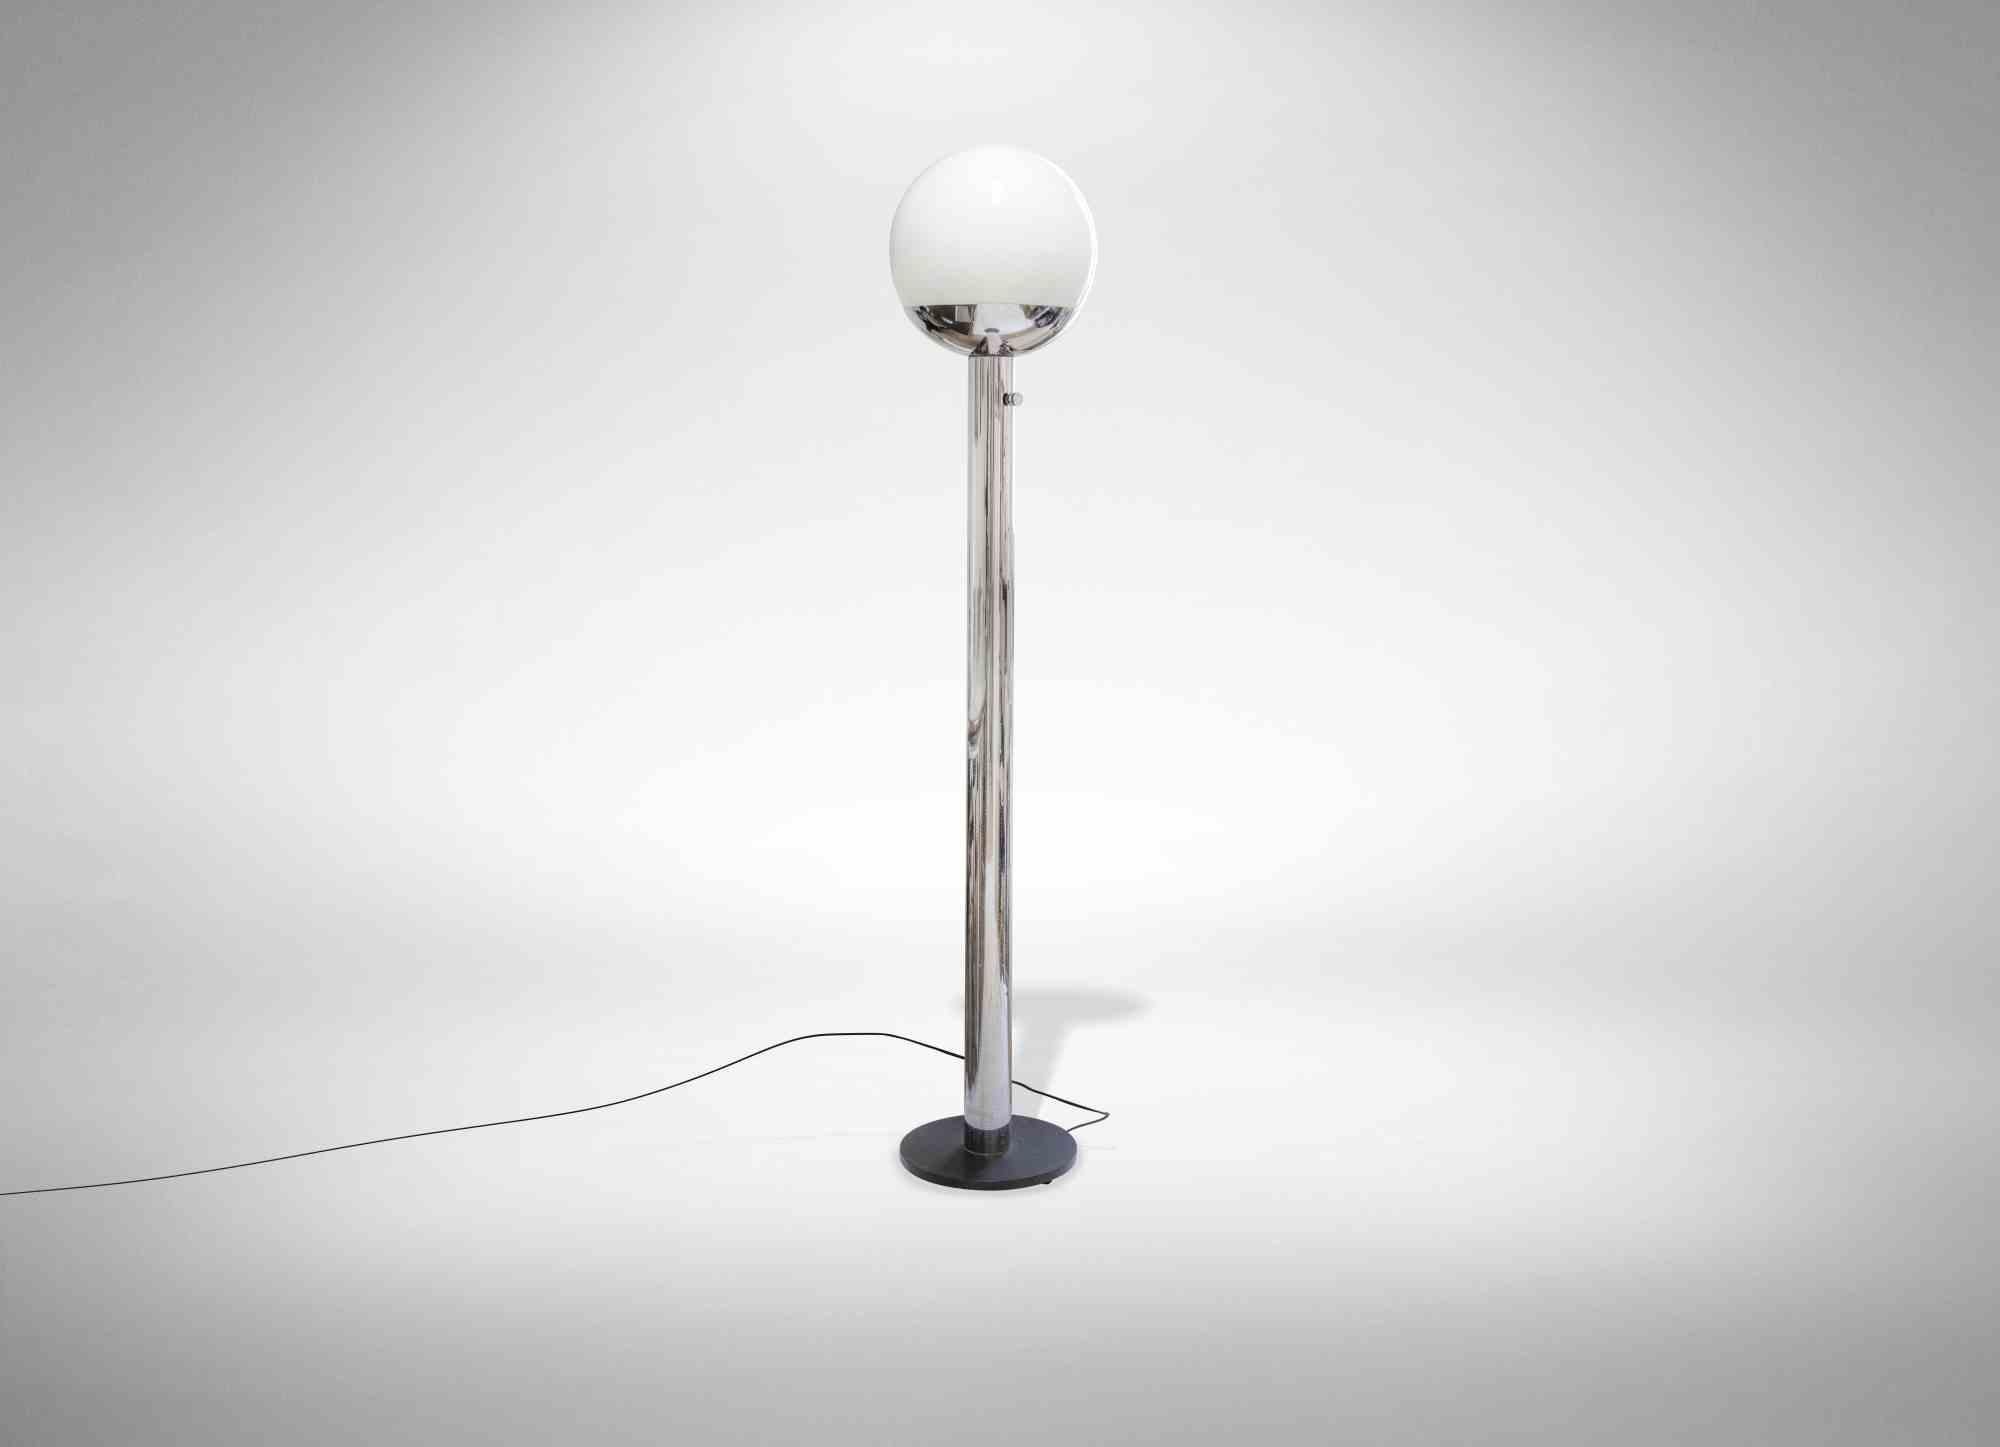 Italian Vintage Floor Lamp P428 by Pia Guidetti Crippa, Mid-20th Century For Sale